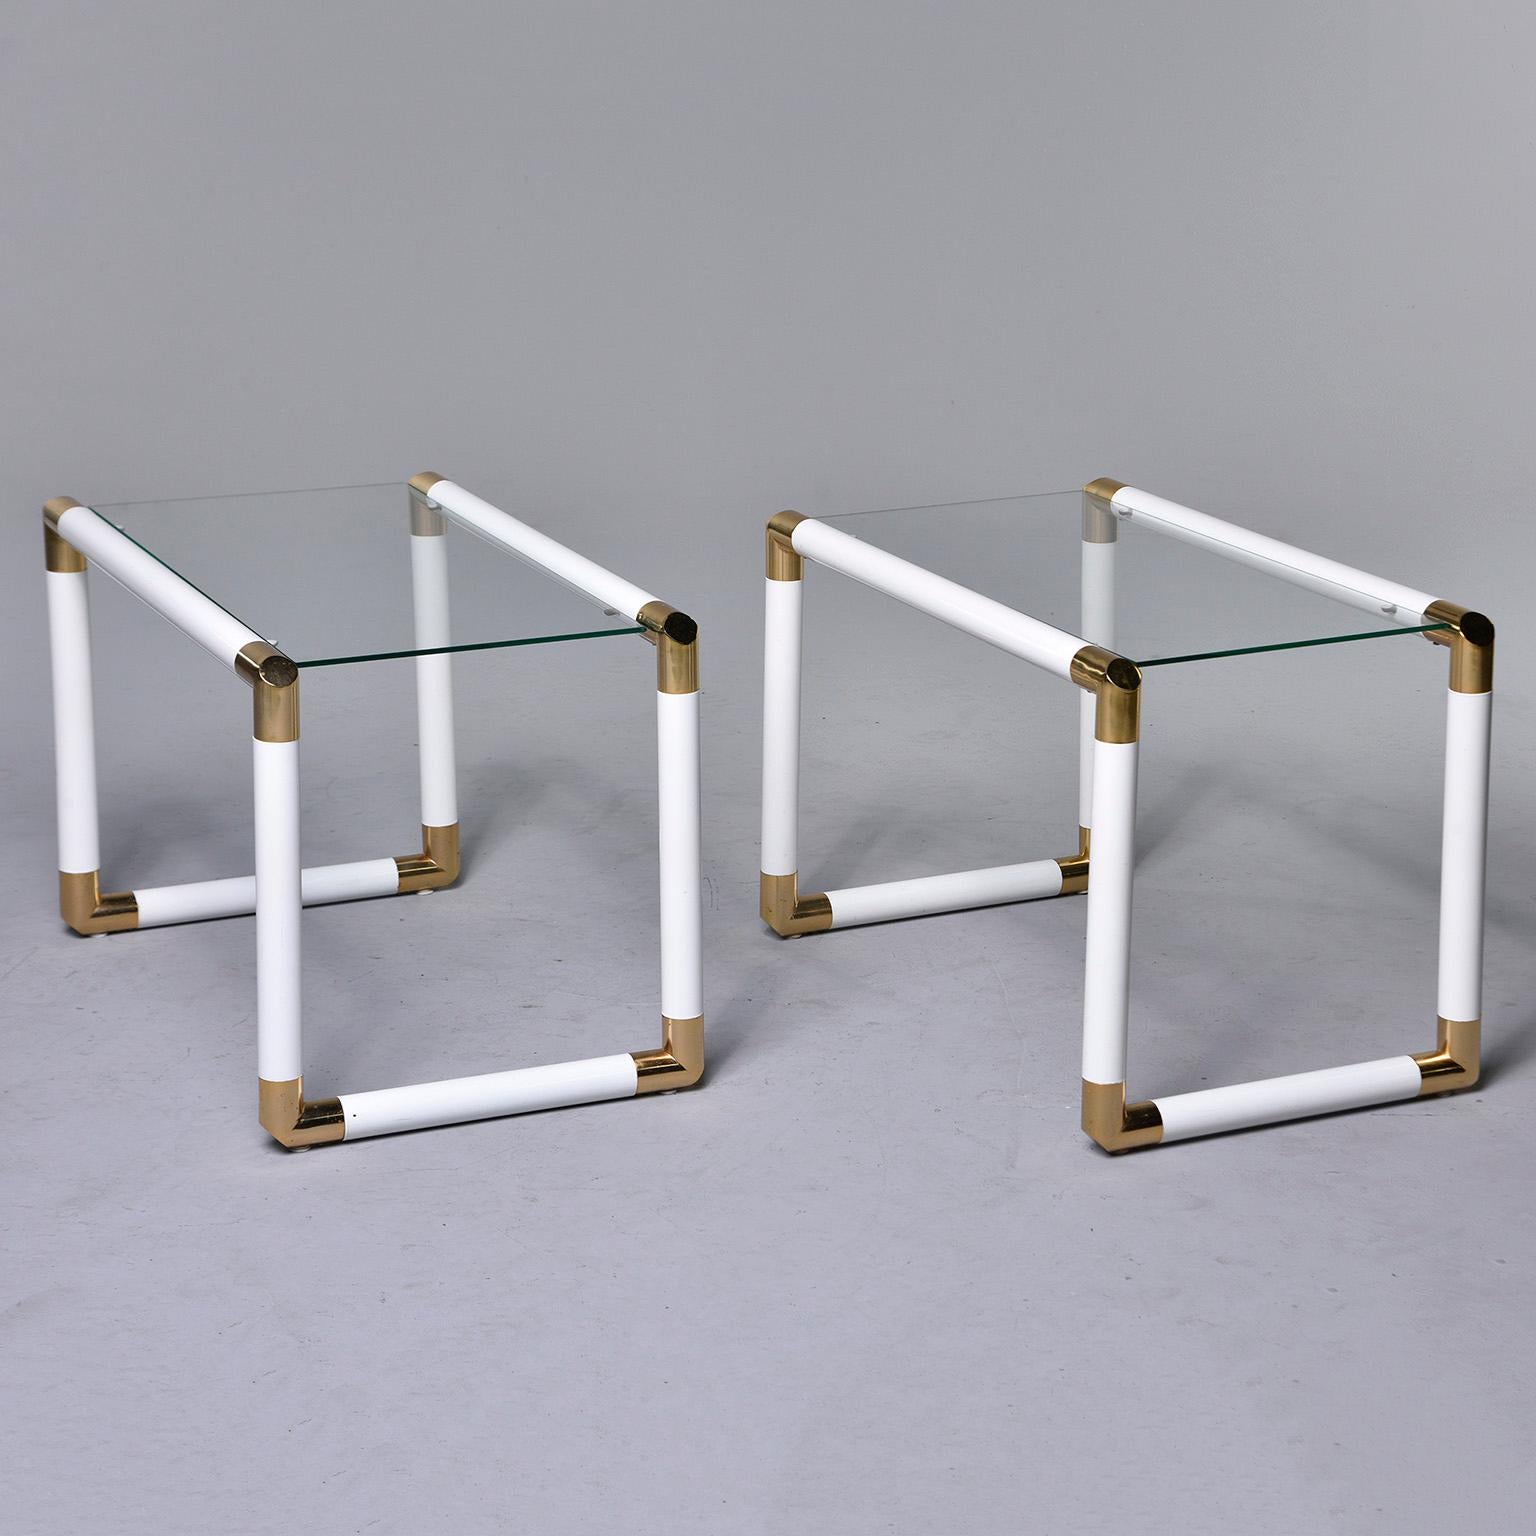 Pair of occasional tables feature white enameled metal tubular frames with polished brass joiners/hardware and clear glass tops, circa 1970s. Unknown maker. Sold and priced as a pair.